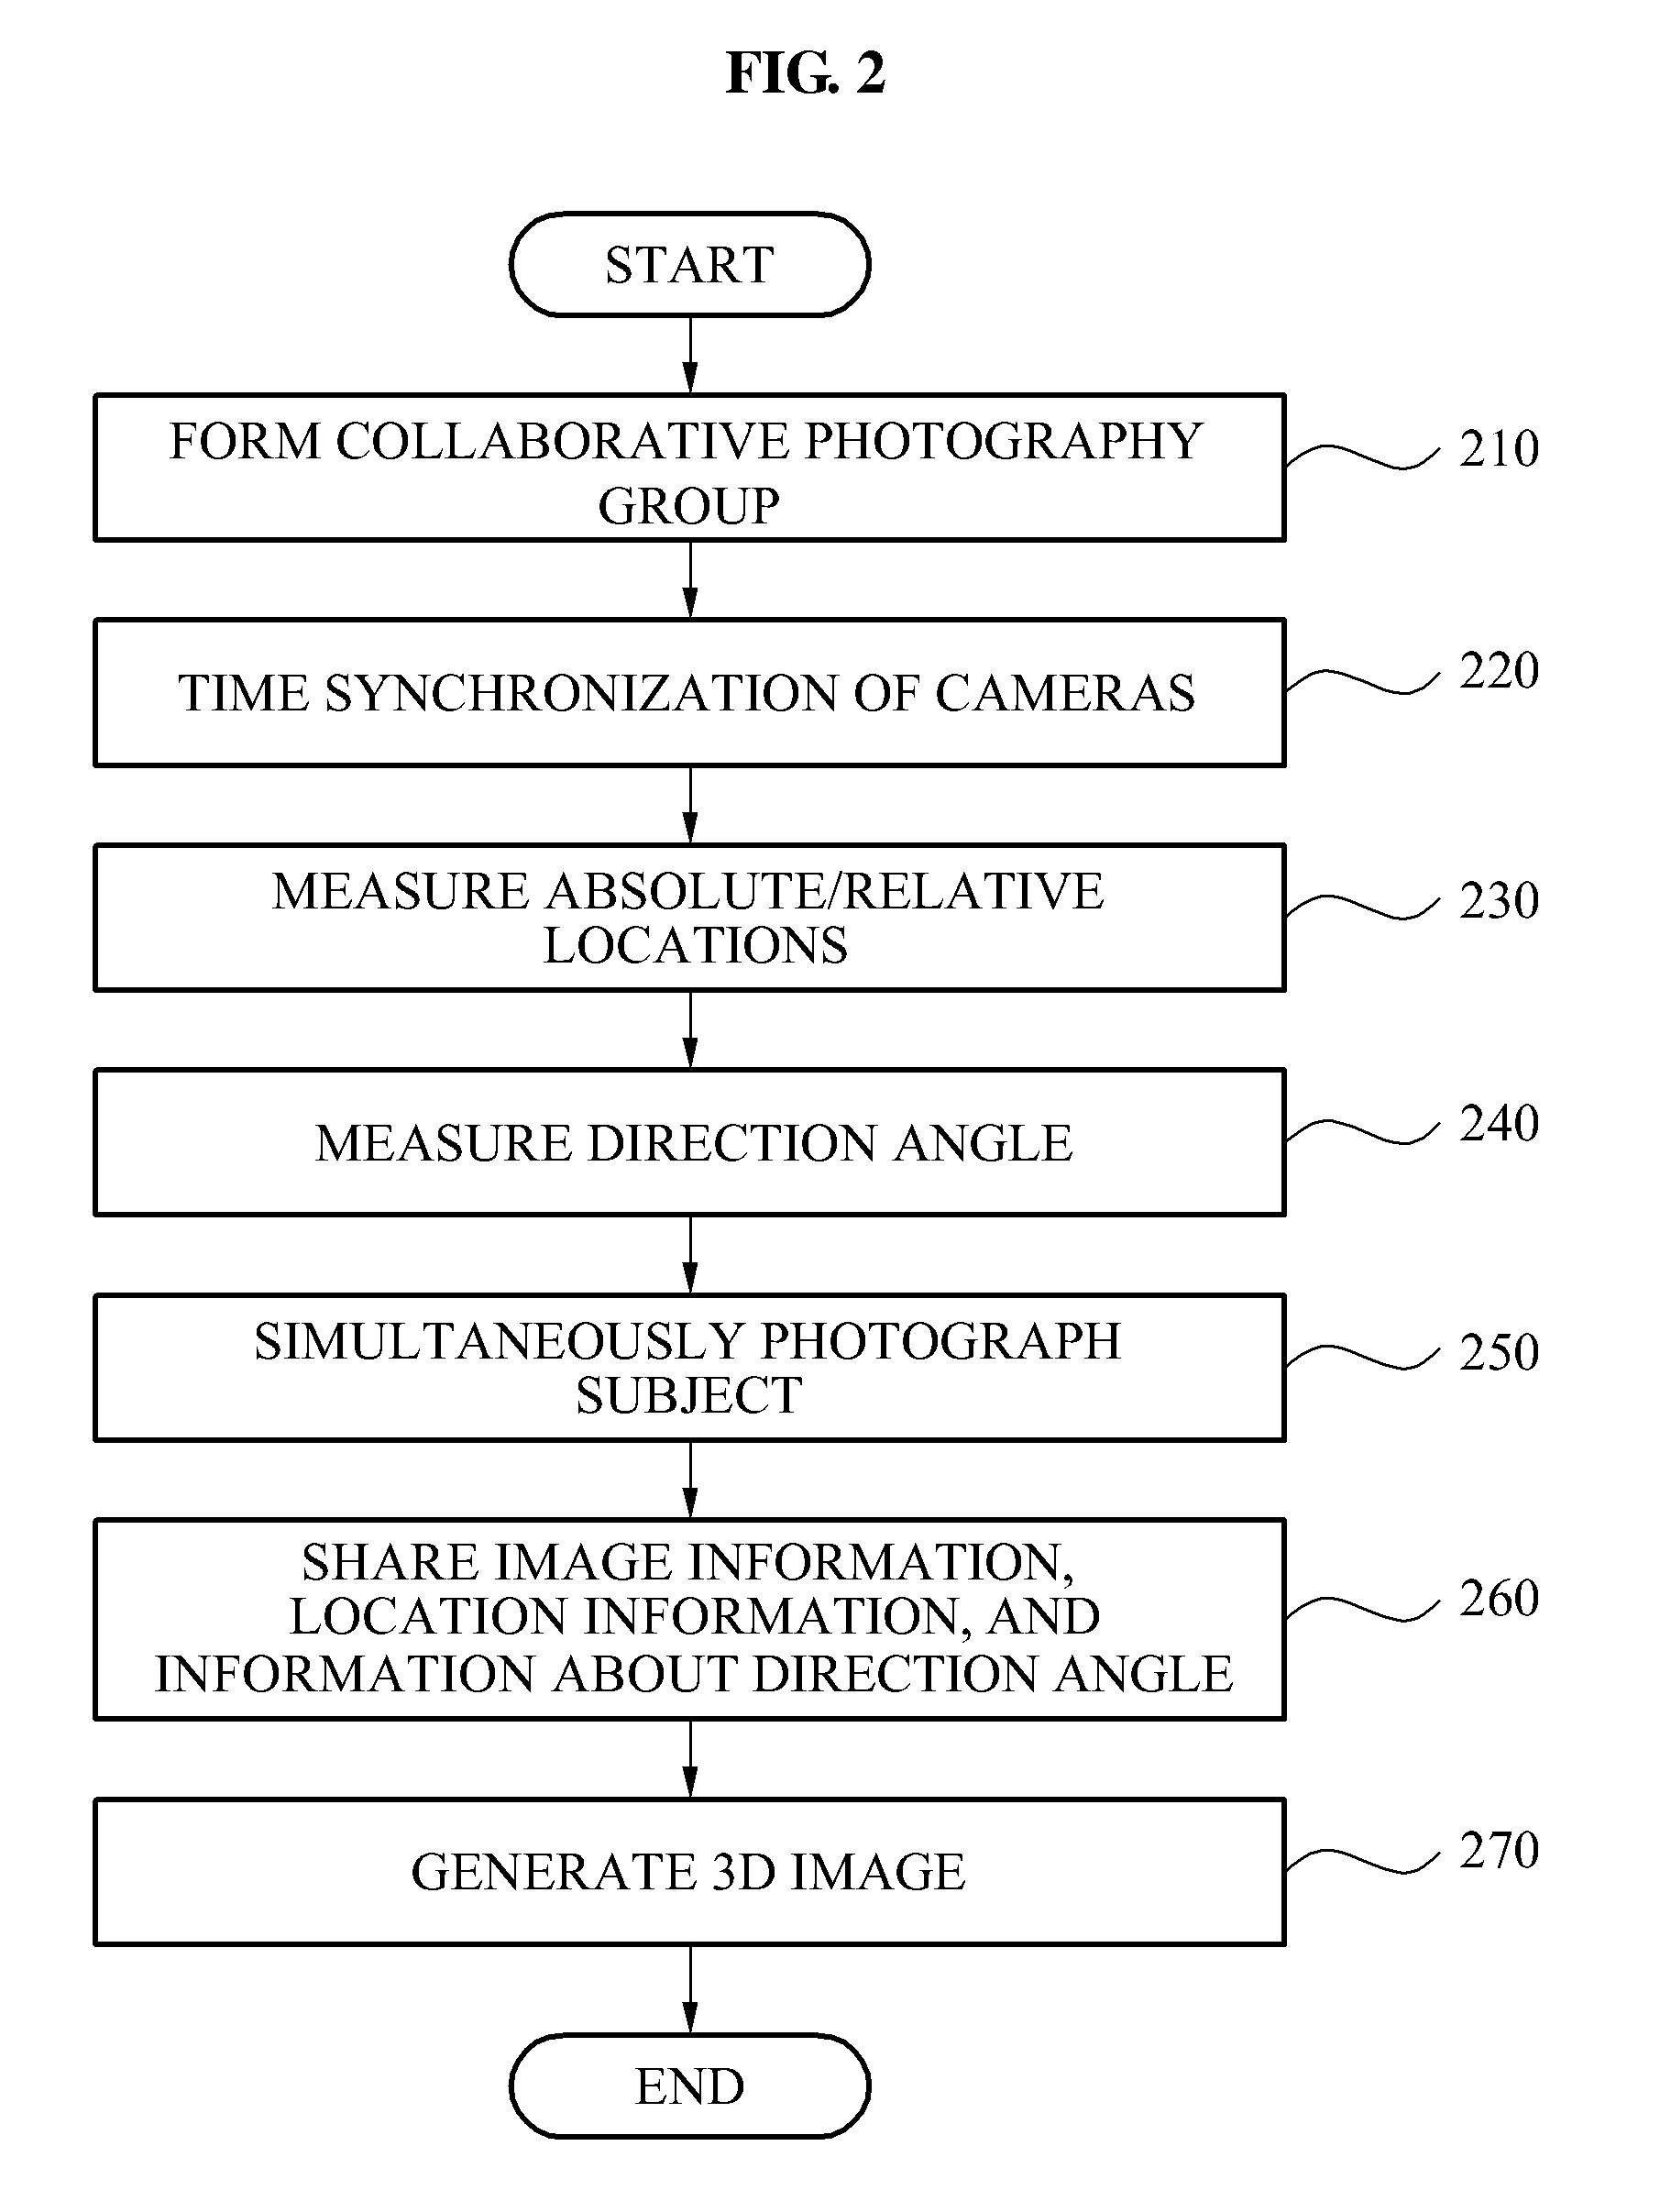 Apparatus and method for generating a three-dimensional image using a collaborative photography group